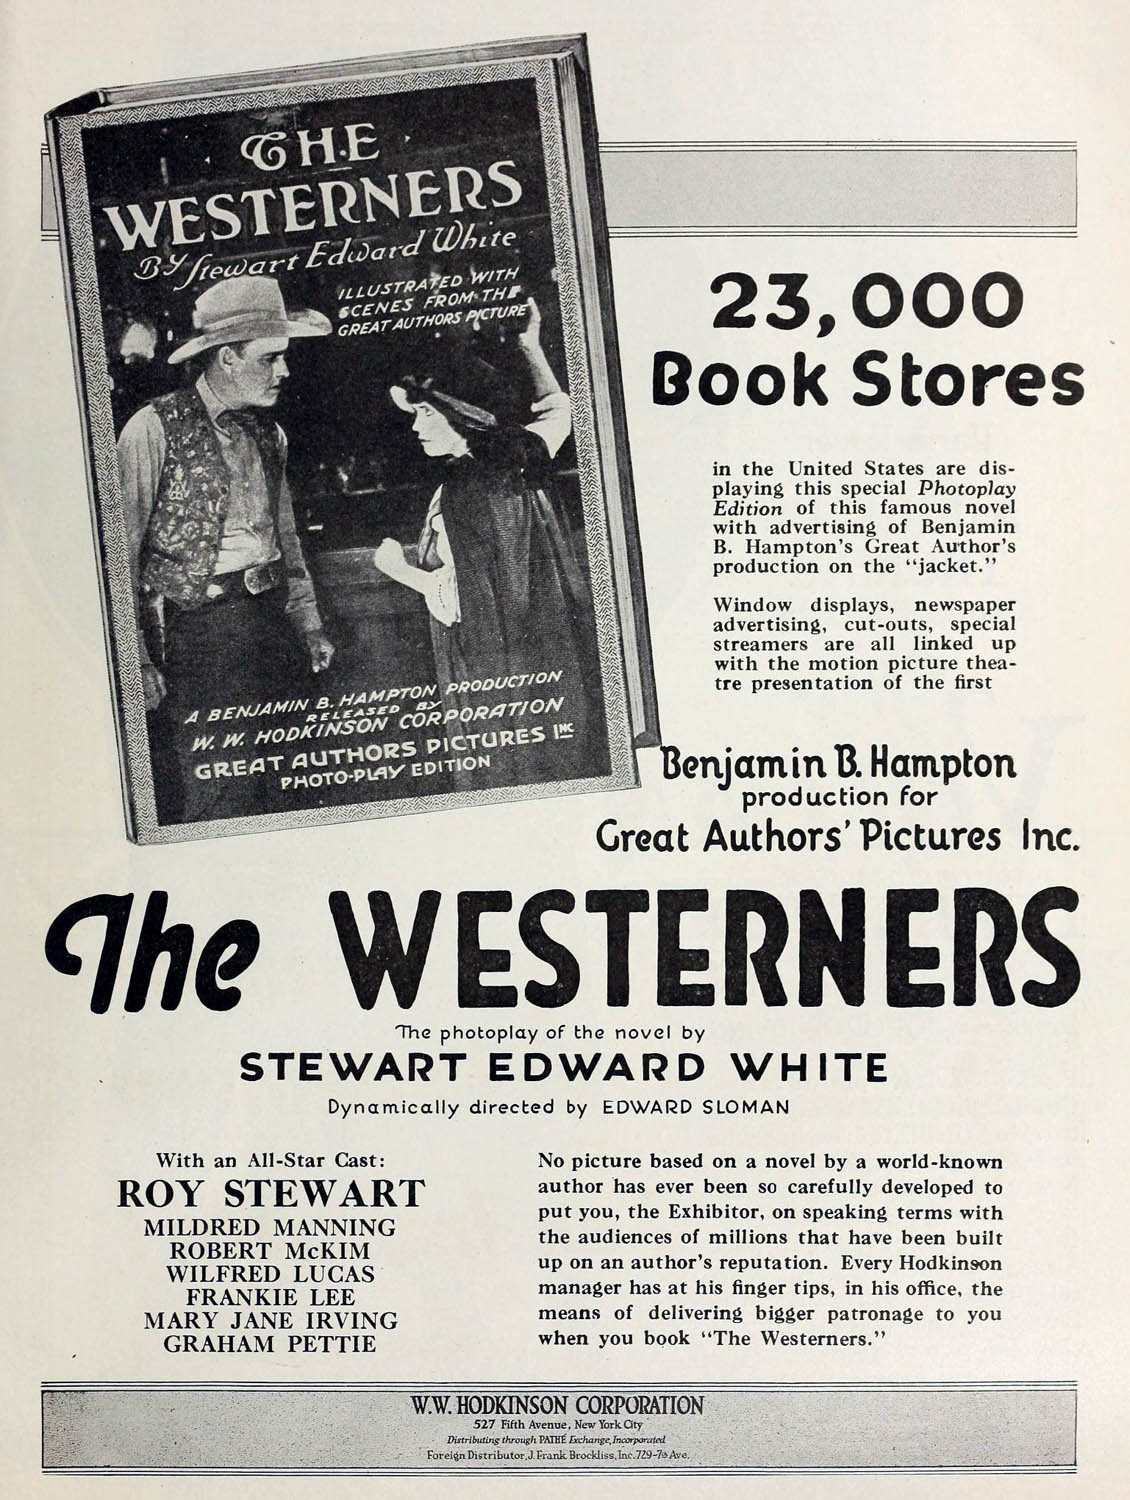 WESTERNERS, THE